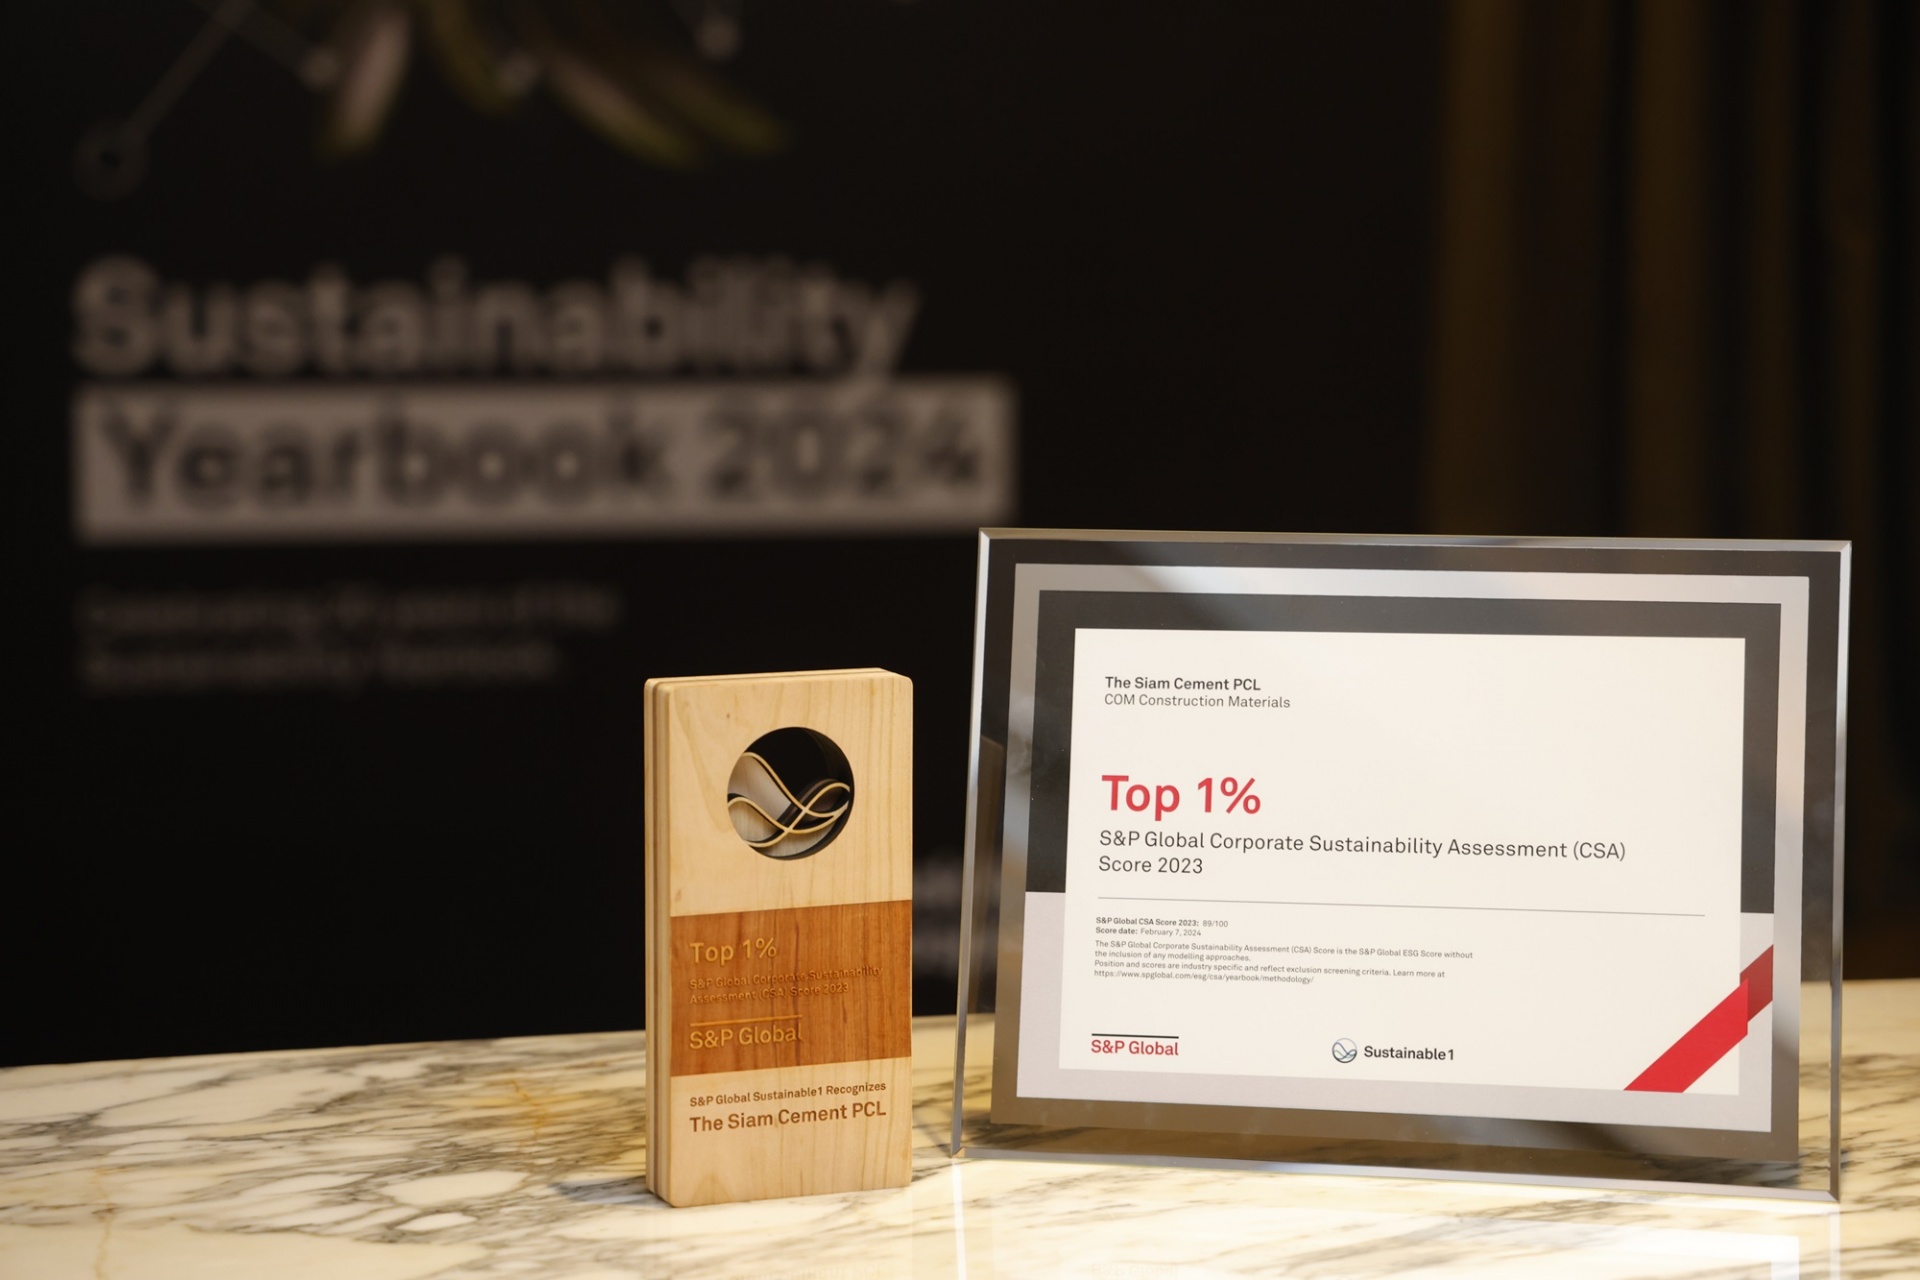 SCG named in top 1 per cent in S&P Global Corporate Sustainability Assessment